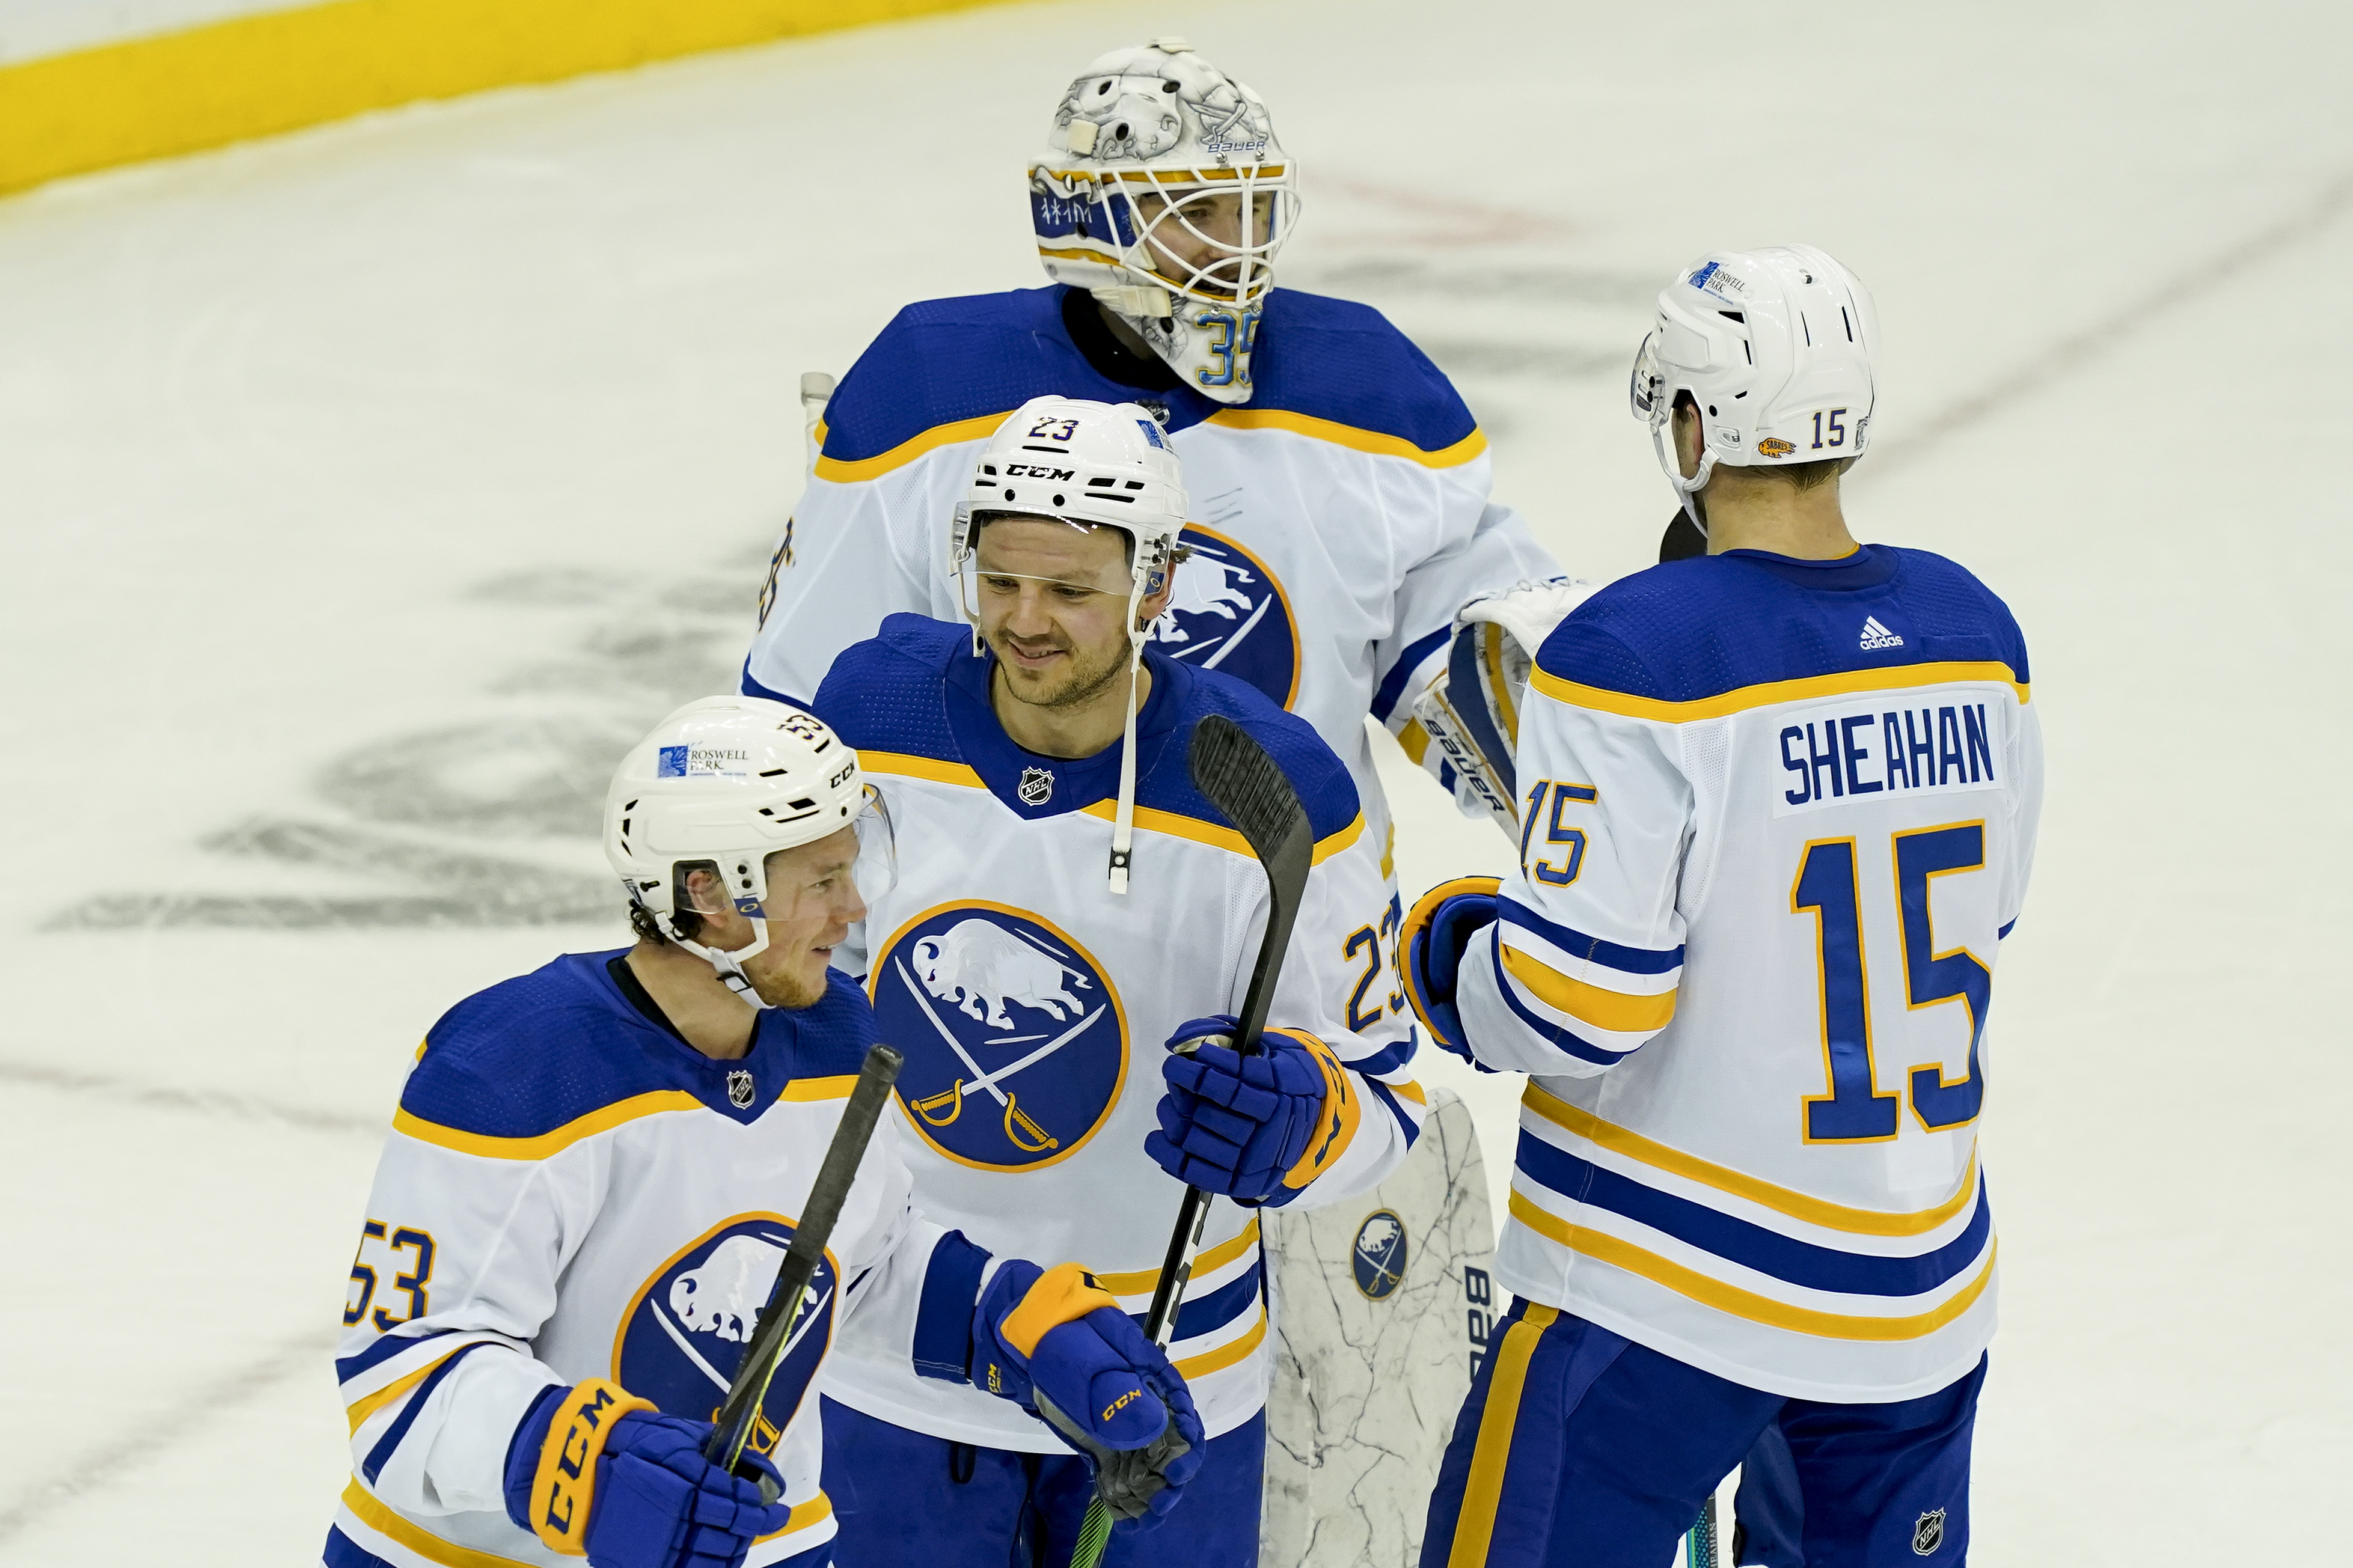 How to Watch the Islanders vs. Sabres Game: Streaming & TV Info - October 14